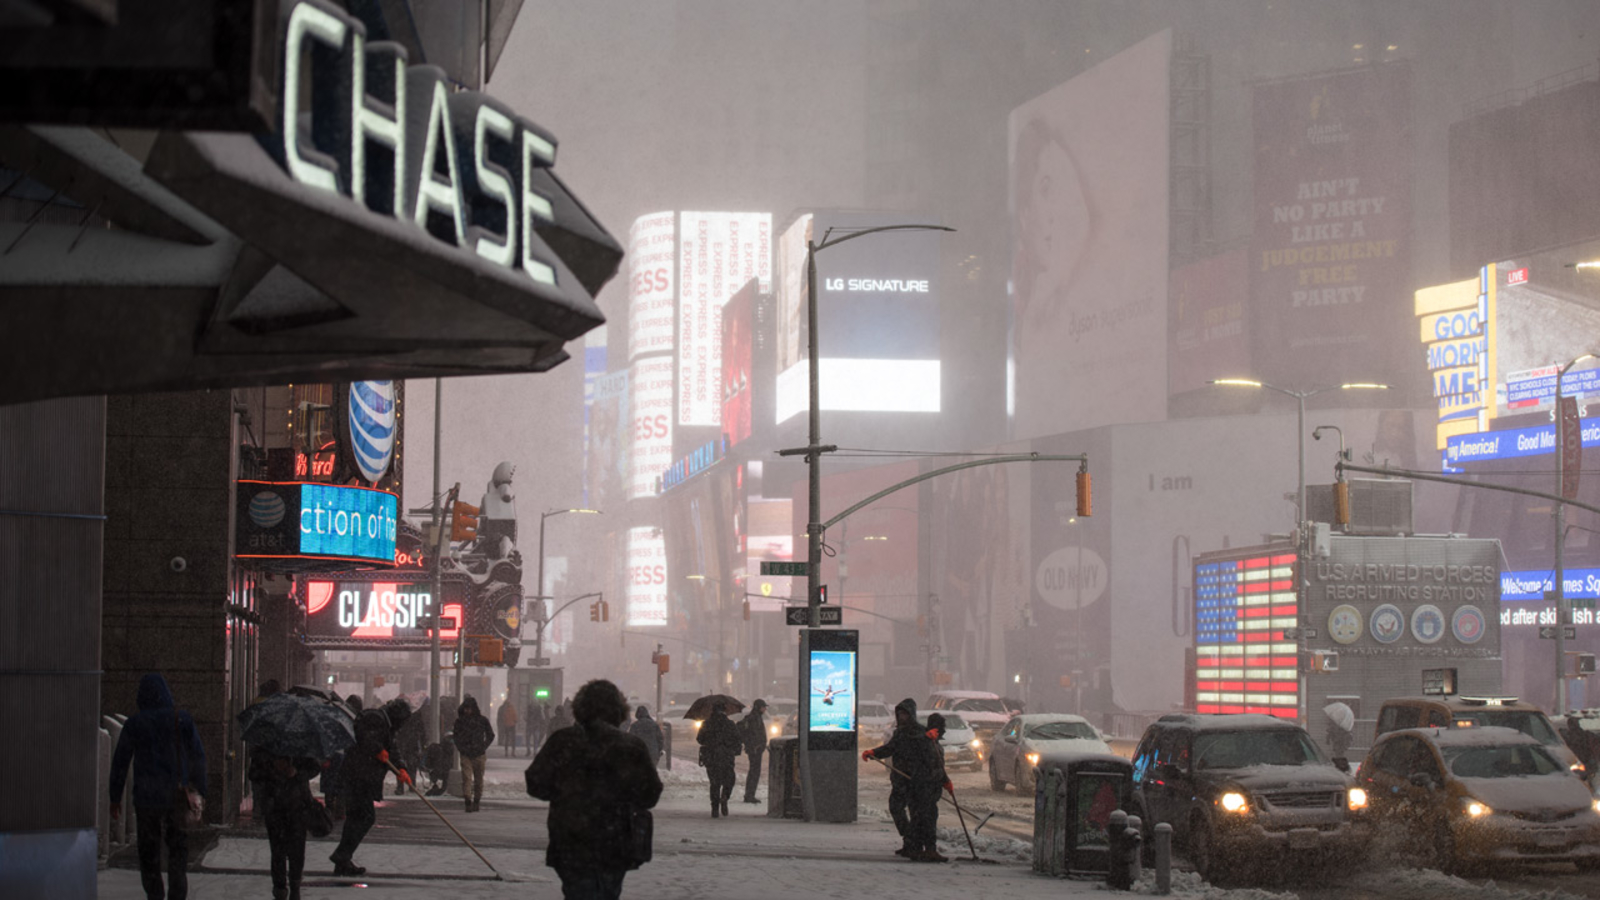 view: Winter storm blasts Times Square in NYC with snow New York